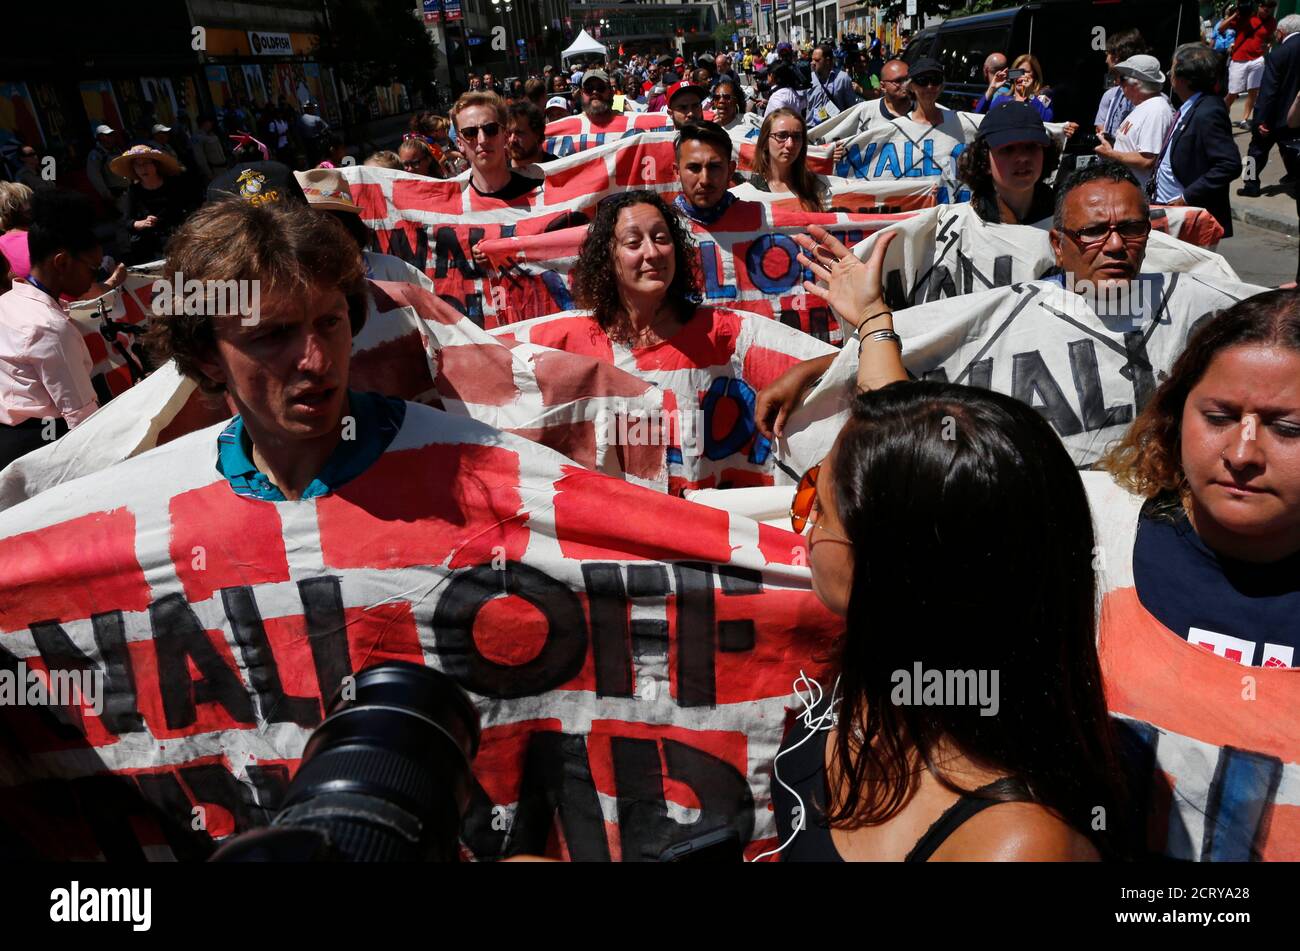 REFILE - CORRECTING DATE Demonstrators protesting against the immigration policies of Republican U.S. presidential nominee Donald Trump march outside the arena hosting the Republican National Convention in Cleveland, Ohio, U.S. July 20, 2016.         REUTERS/Lucas Jackson Stock Photo